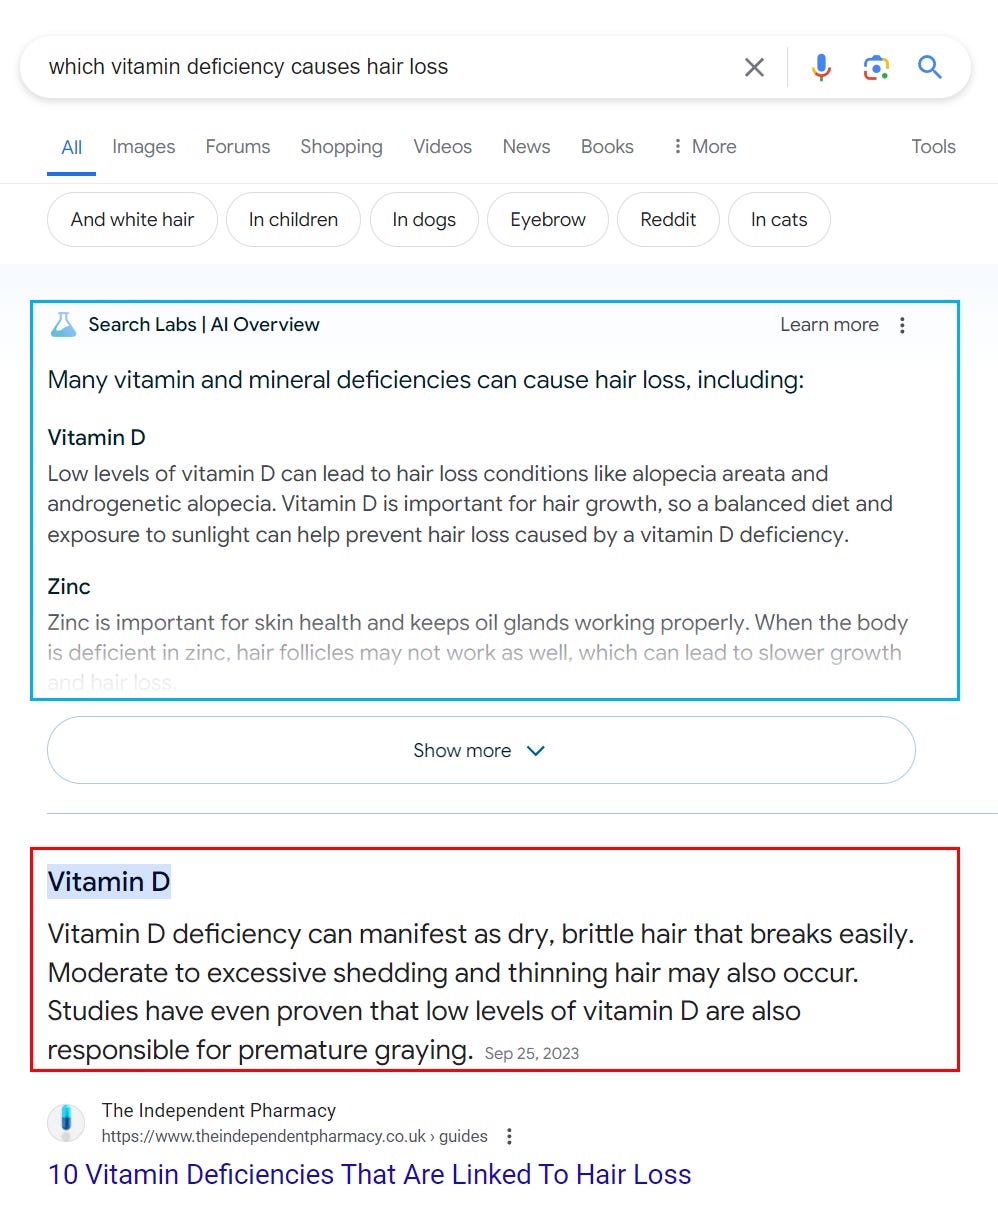 A Google search result page detailing information on vitamins and hair loss, with citations emphasizing that Vitamin D deficiency can lead to dry, brittle hair prone to breaking easily and increased shedding and thinning.